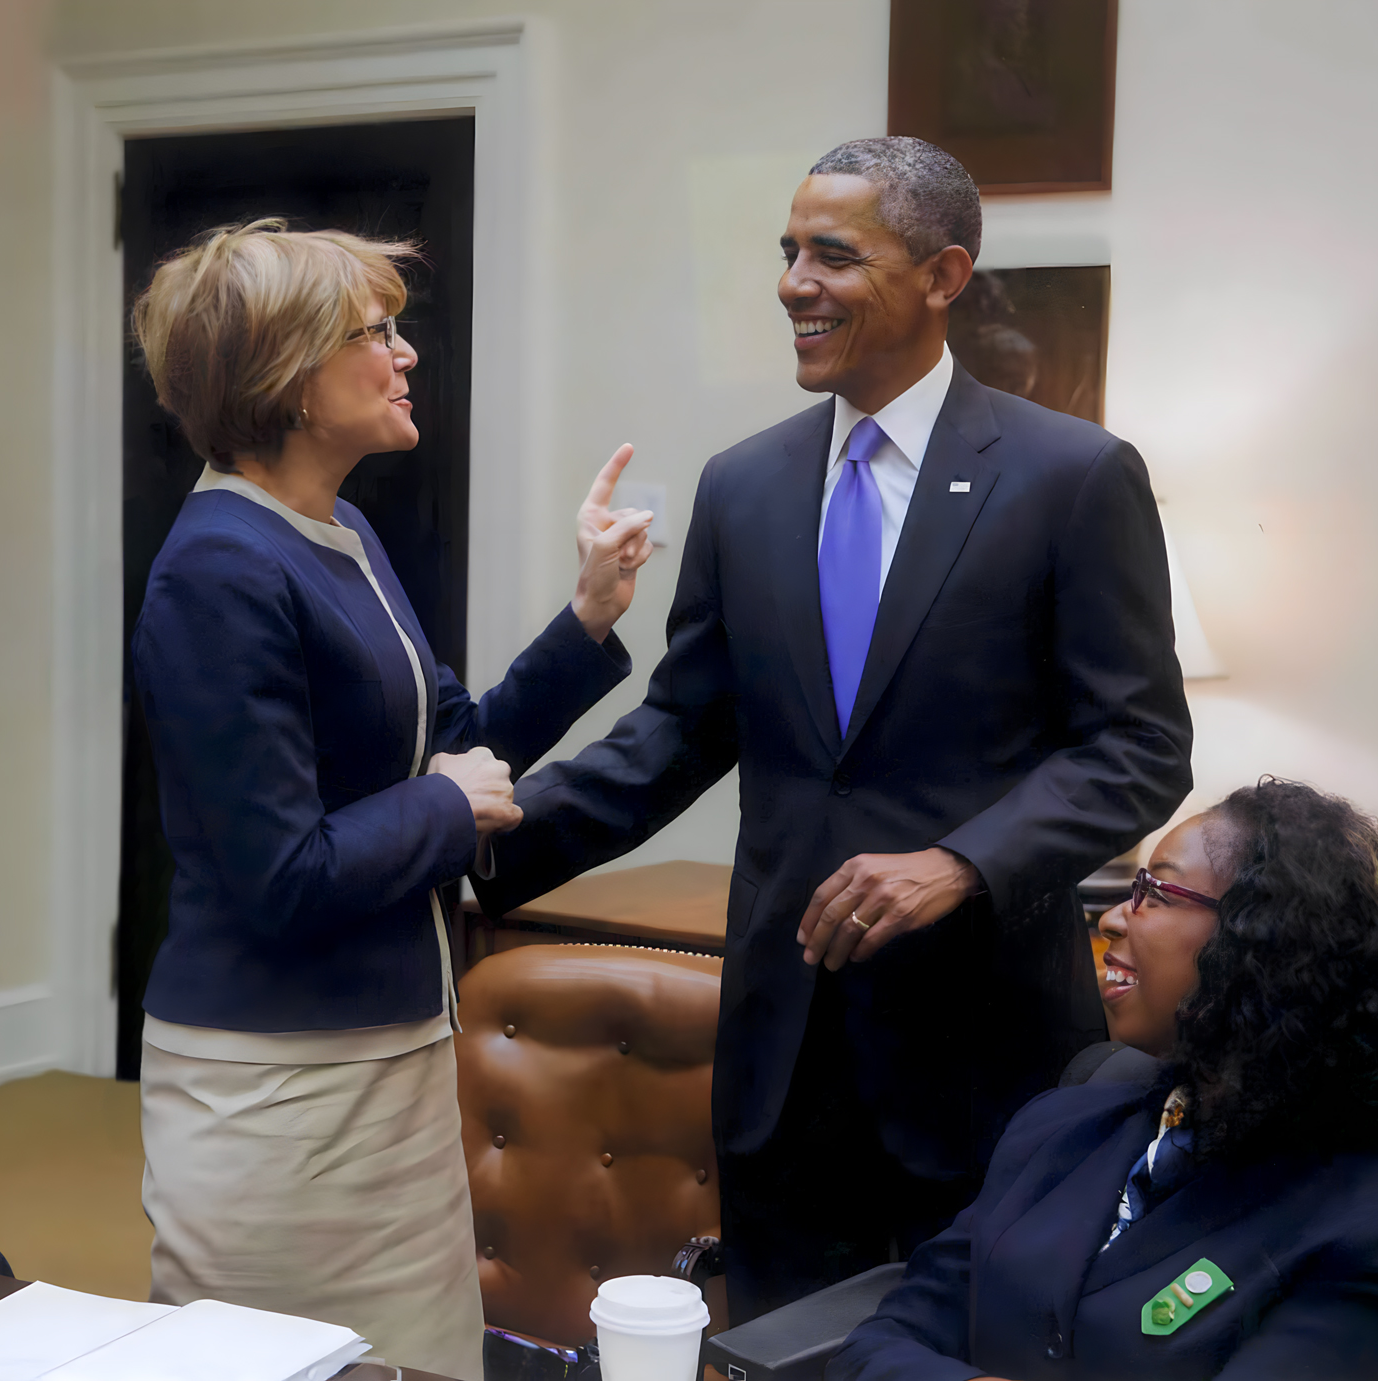 From left to right: Carol glazer shaking hands with President Barack Obama